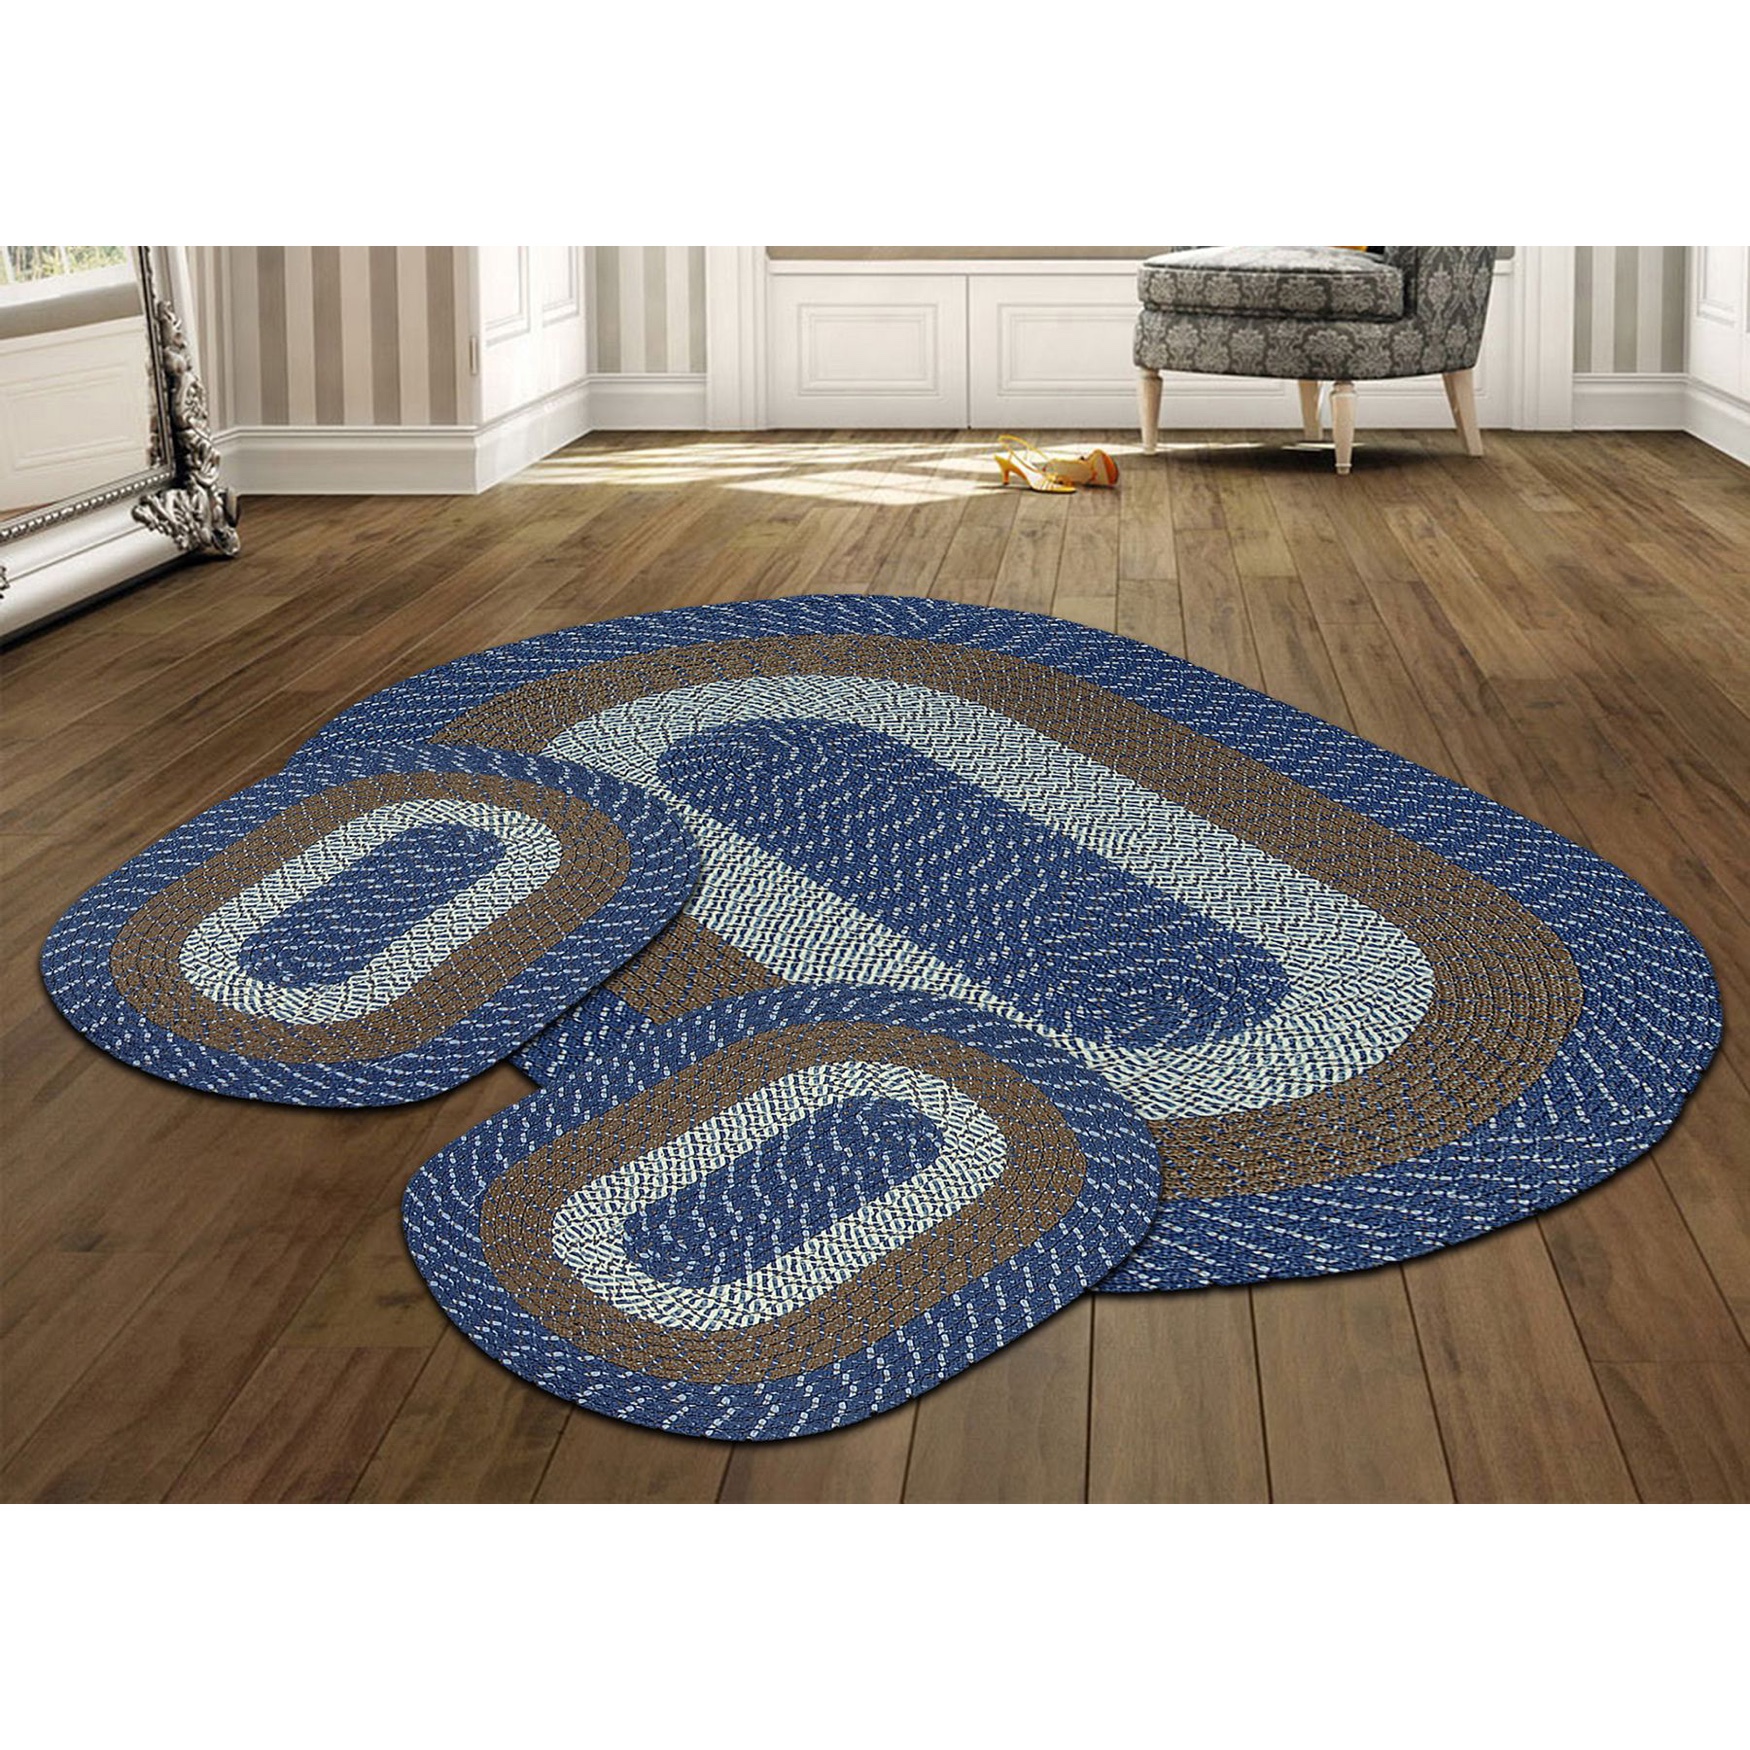 Country Braid Collection 3pc Set Stain Resistant Reversible Indoor Oval Area Rug, 